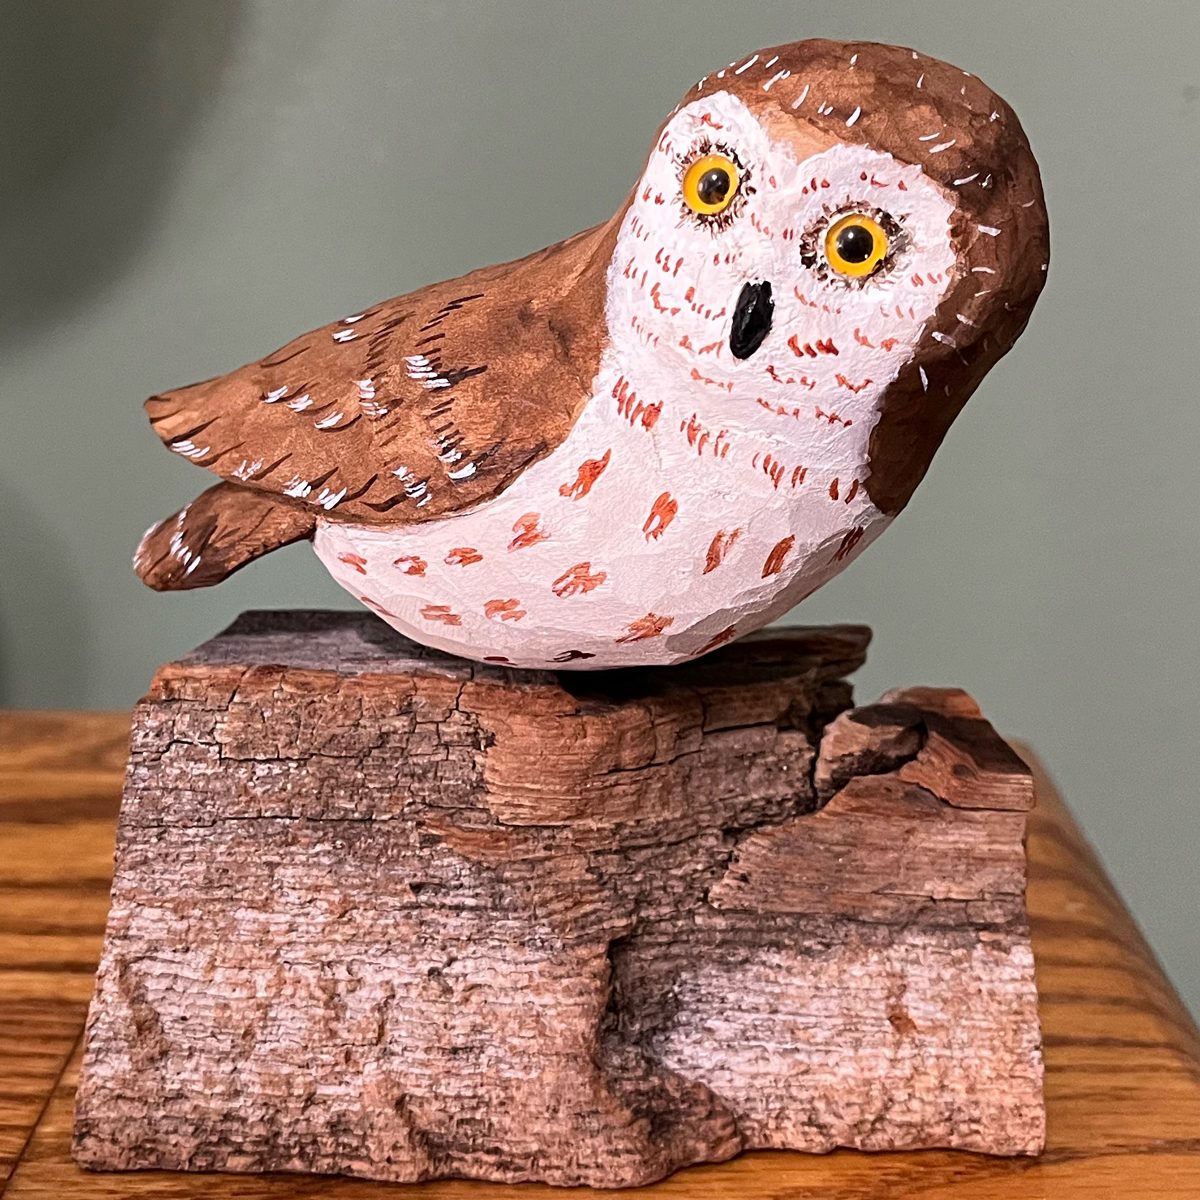 saw-whet owl carved in wood and painted, perched on a chunk of wood with bark on it